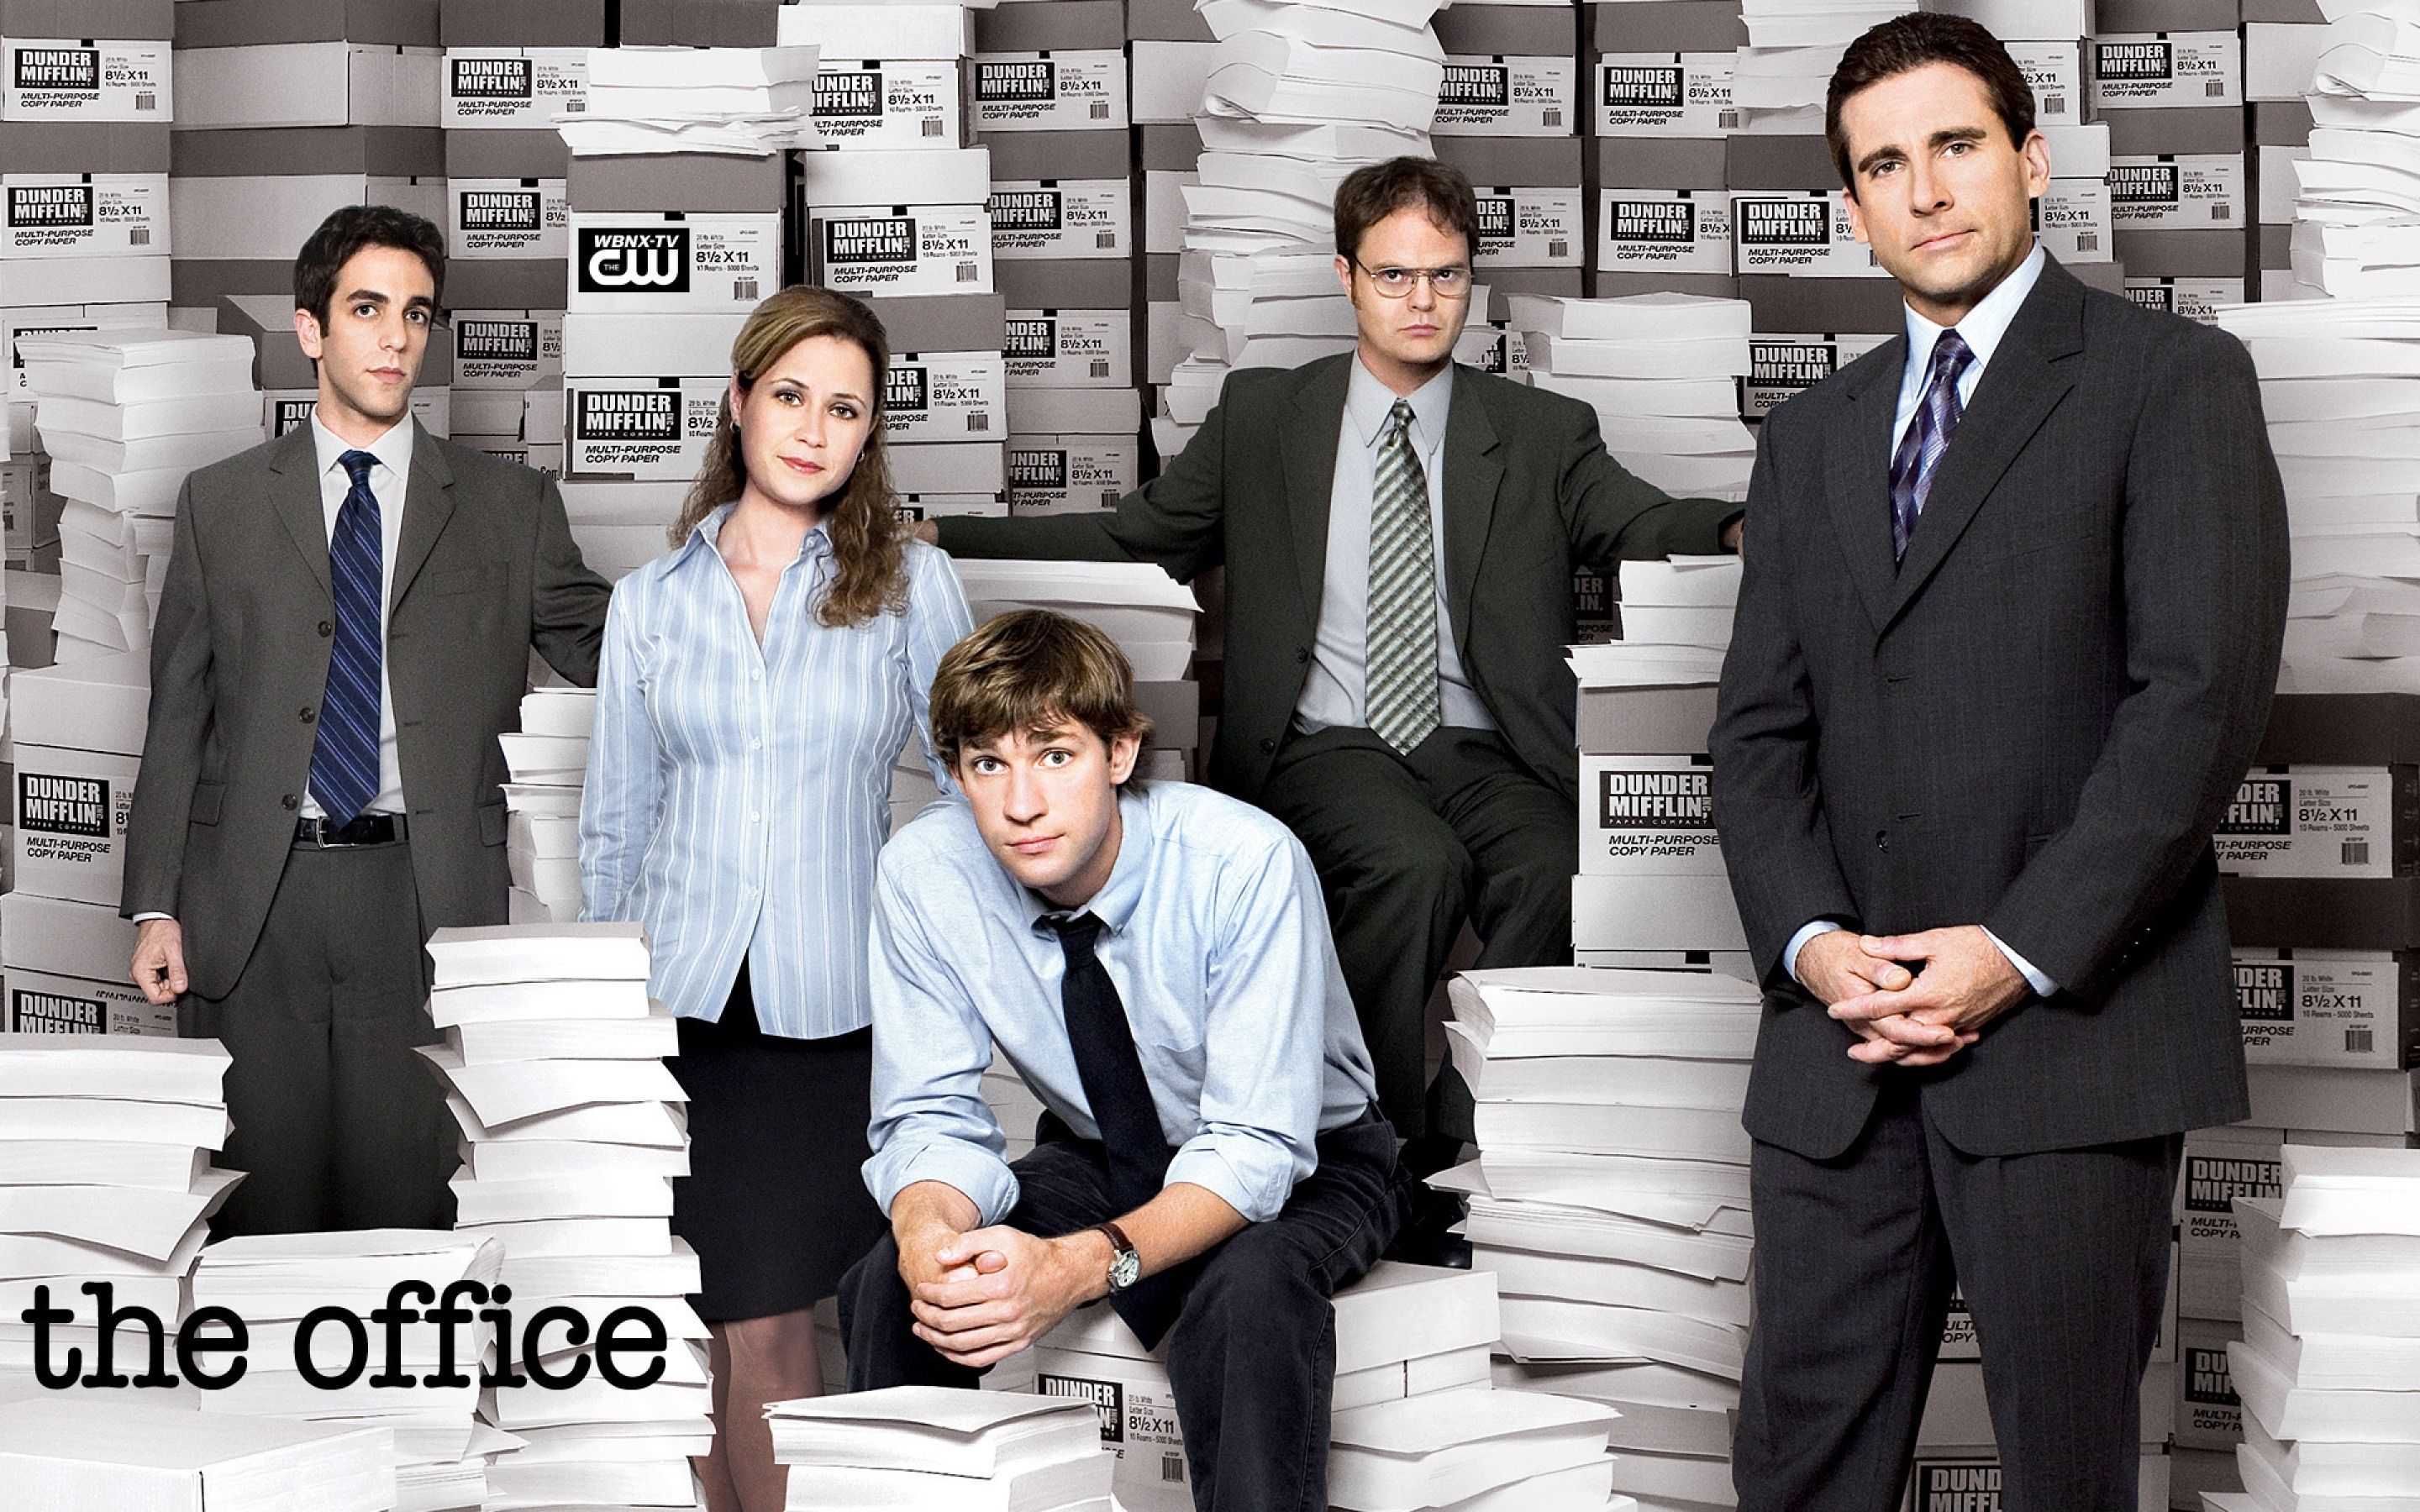 The Office Wallpaper Free The Office Background